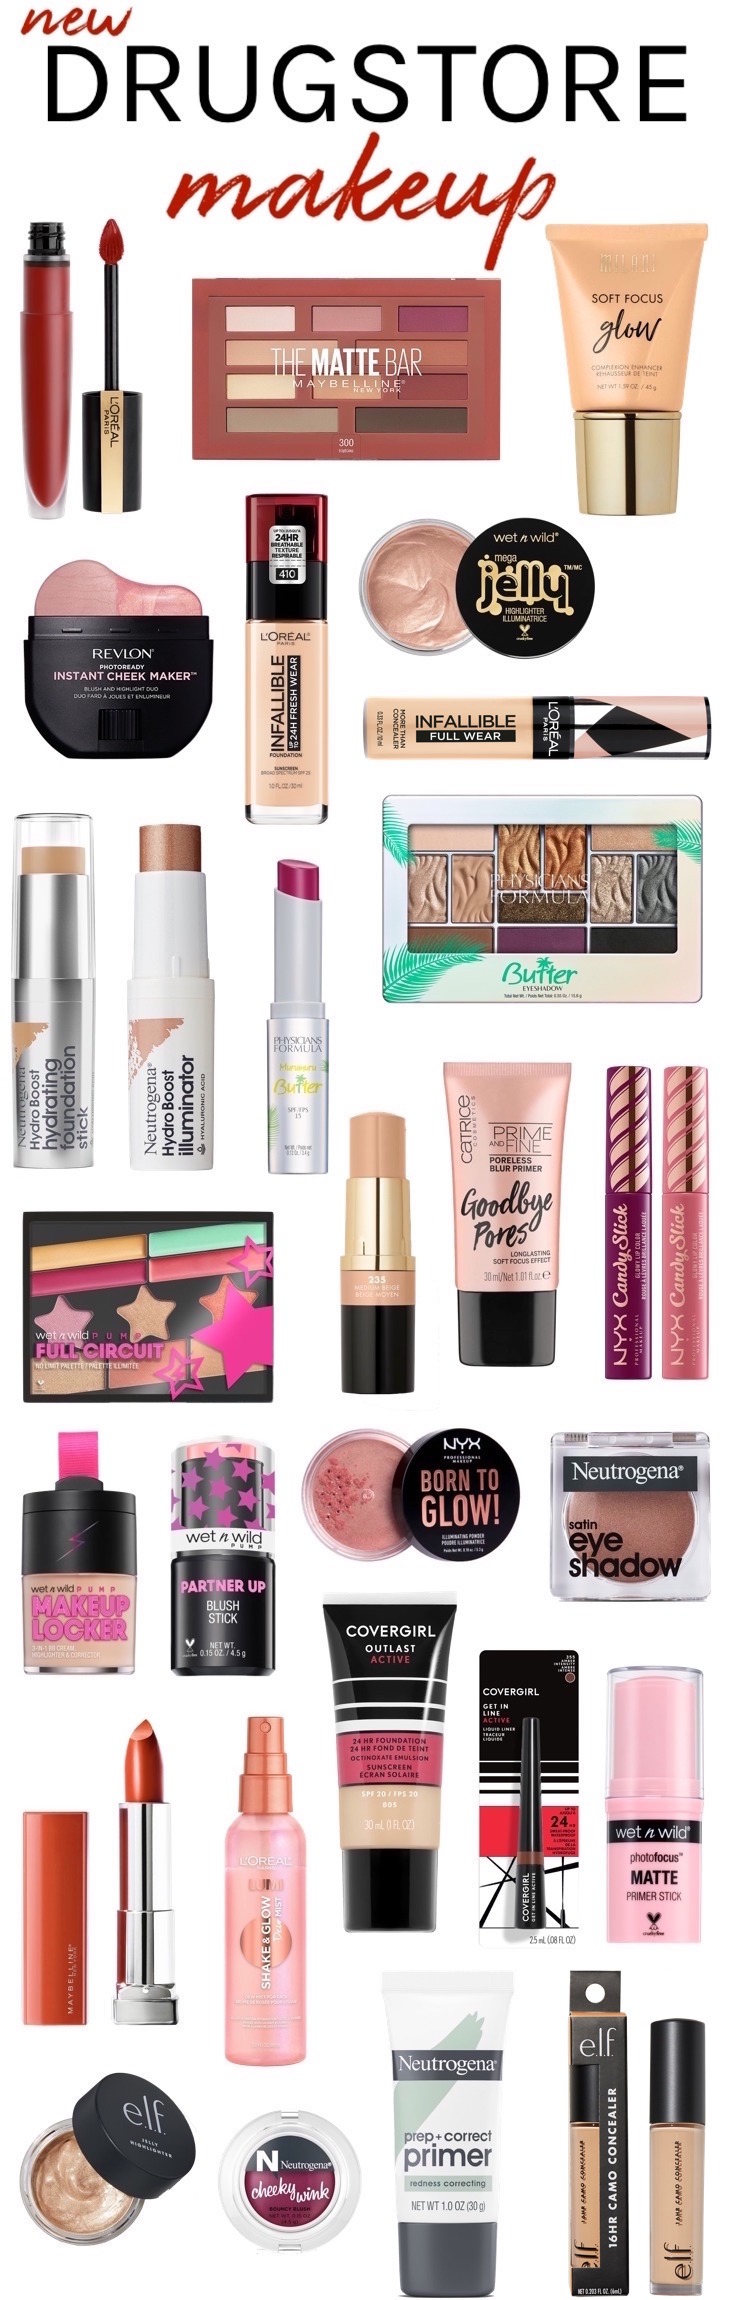 27 New Drugstore Beauty Products You Need to Check Out Now! #newdrugstorebeauty #drugstoremakeup